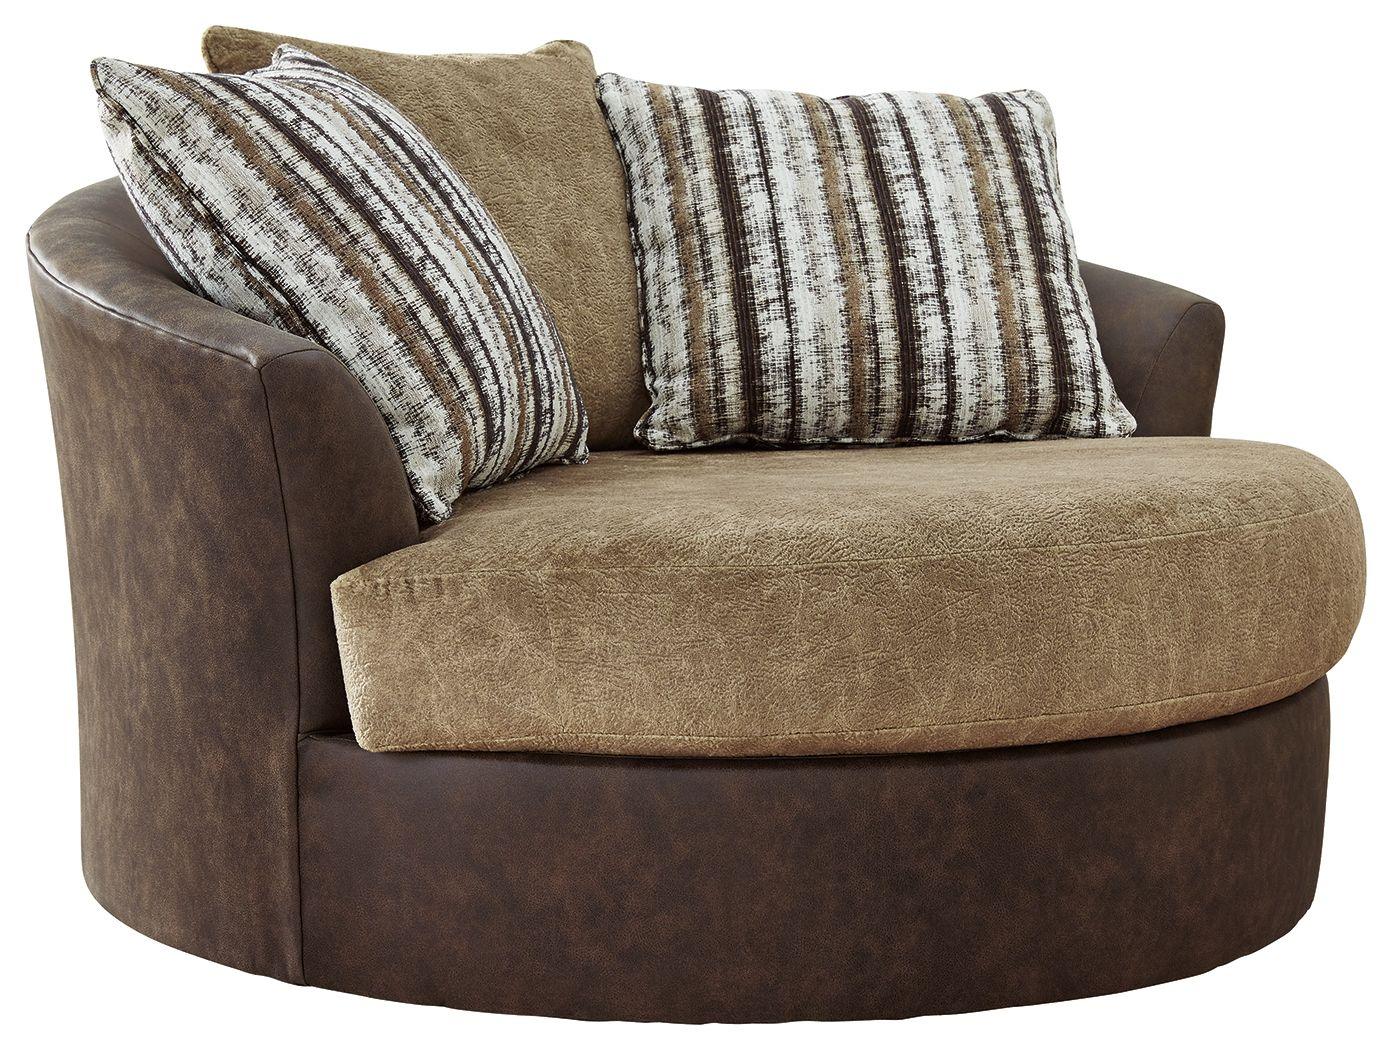 Signature Design by Ashley® - Alesbury - Chocolate - Oversized Swivel Accent Chair - 5th Avenue Furniture